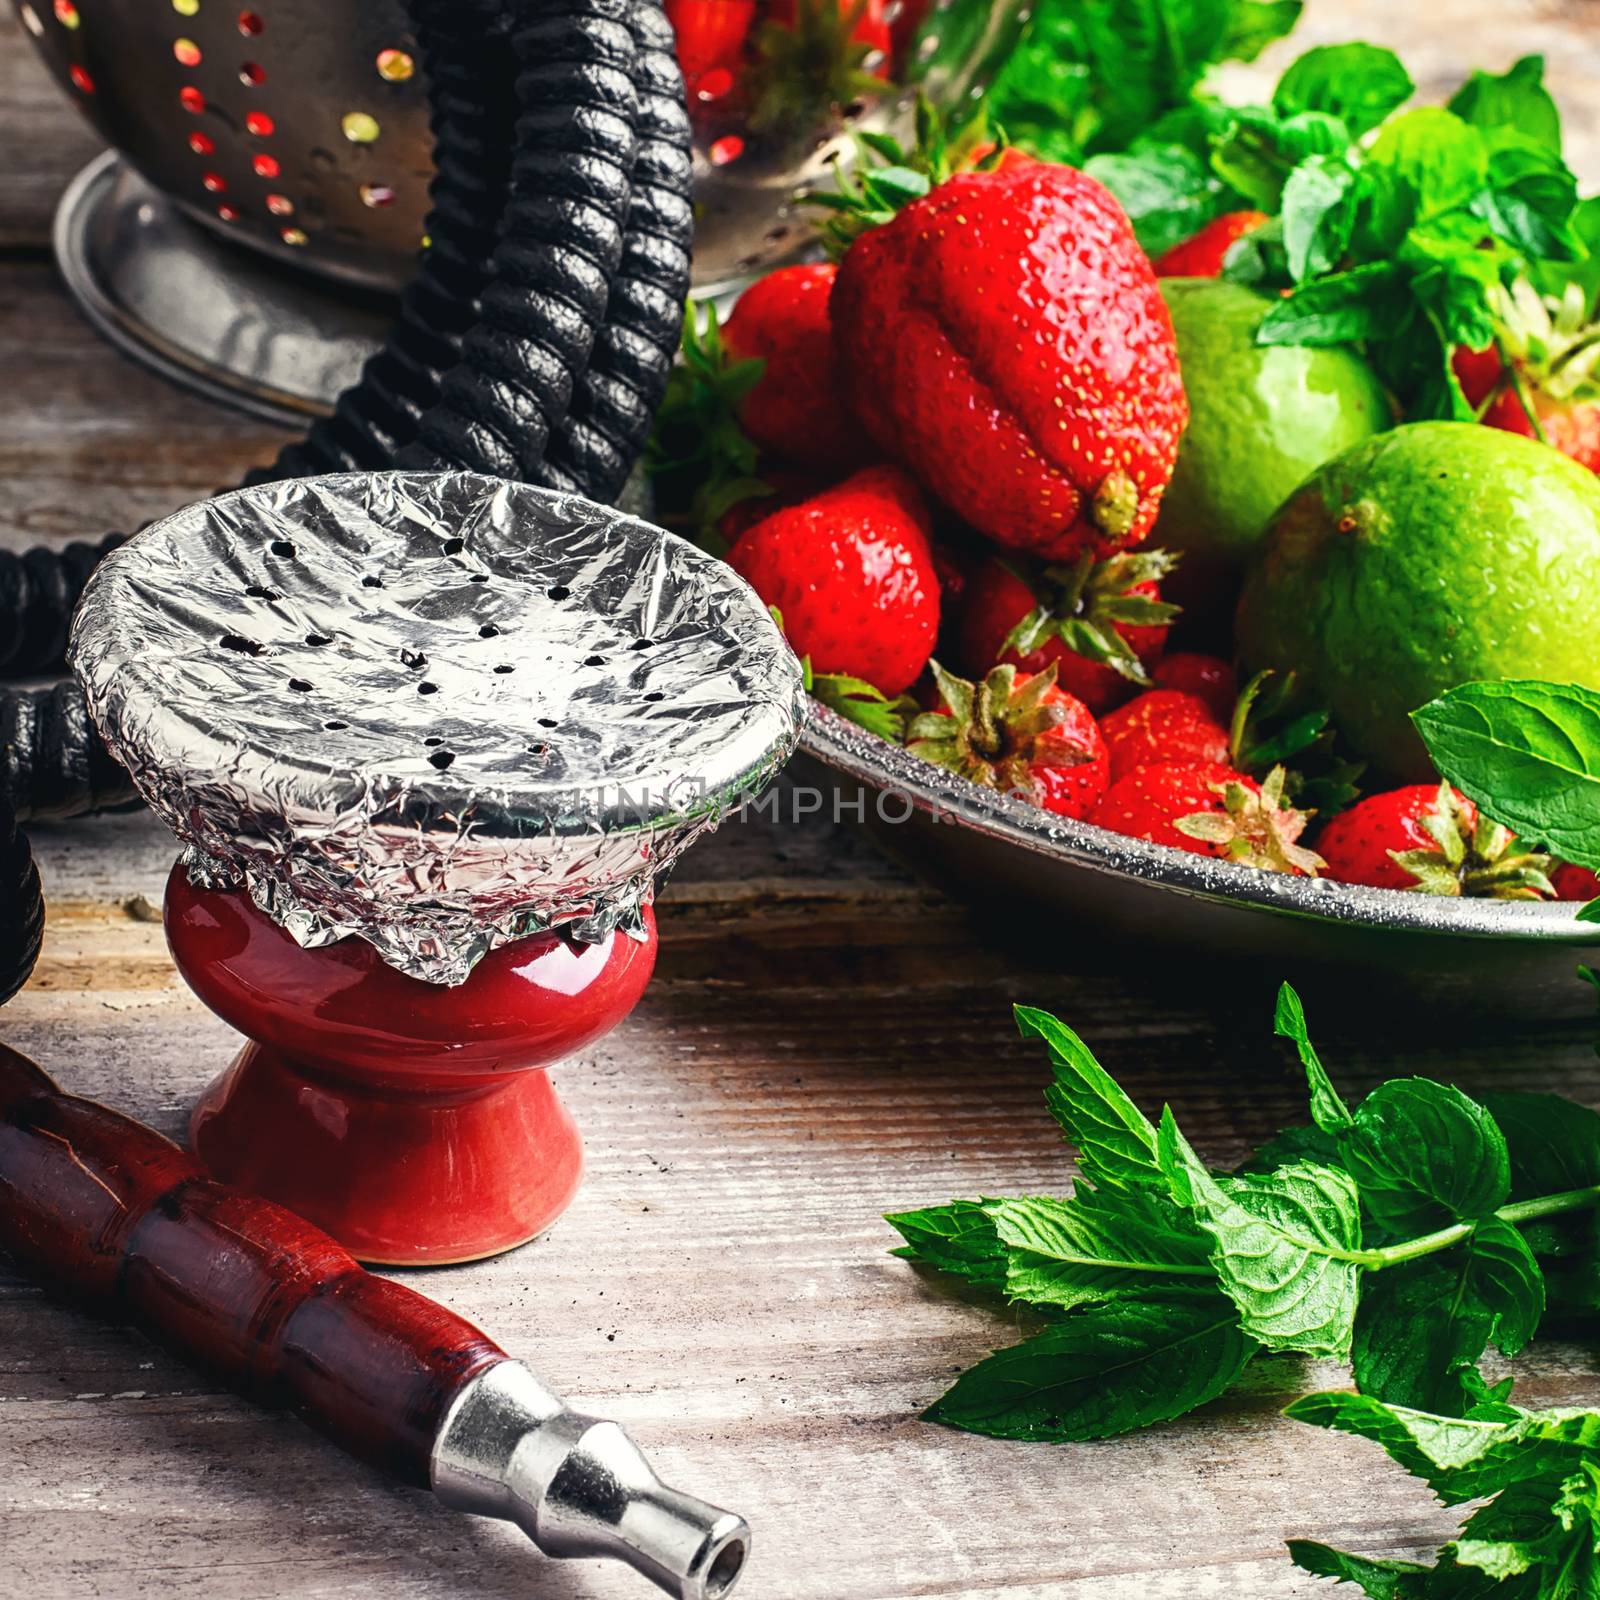 Eastern hookah with the aroma of lime,strawberry and mint